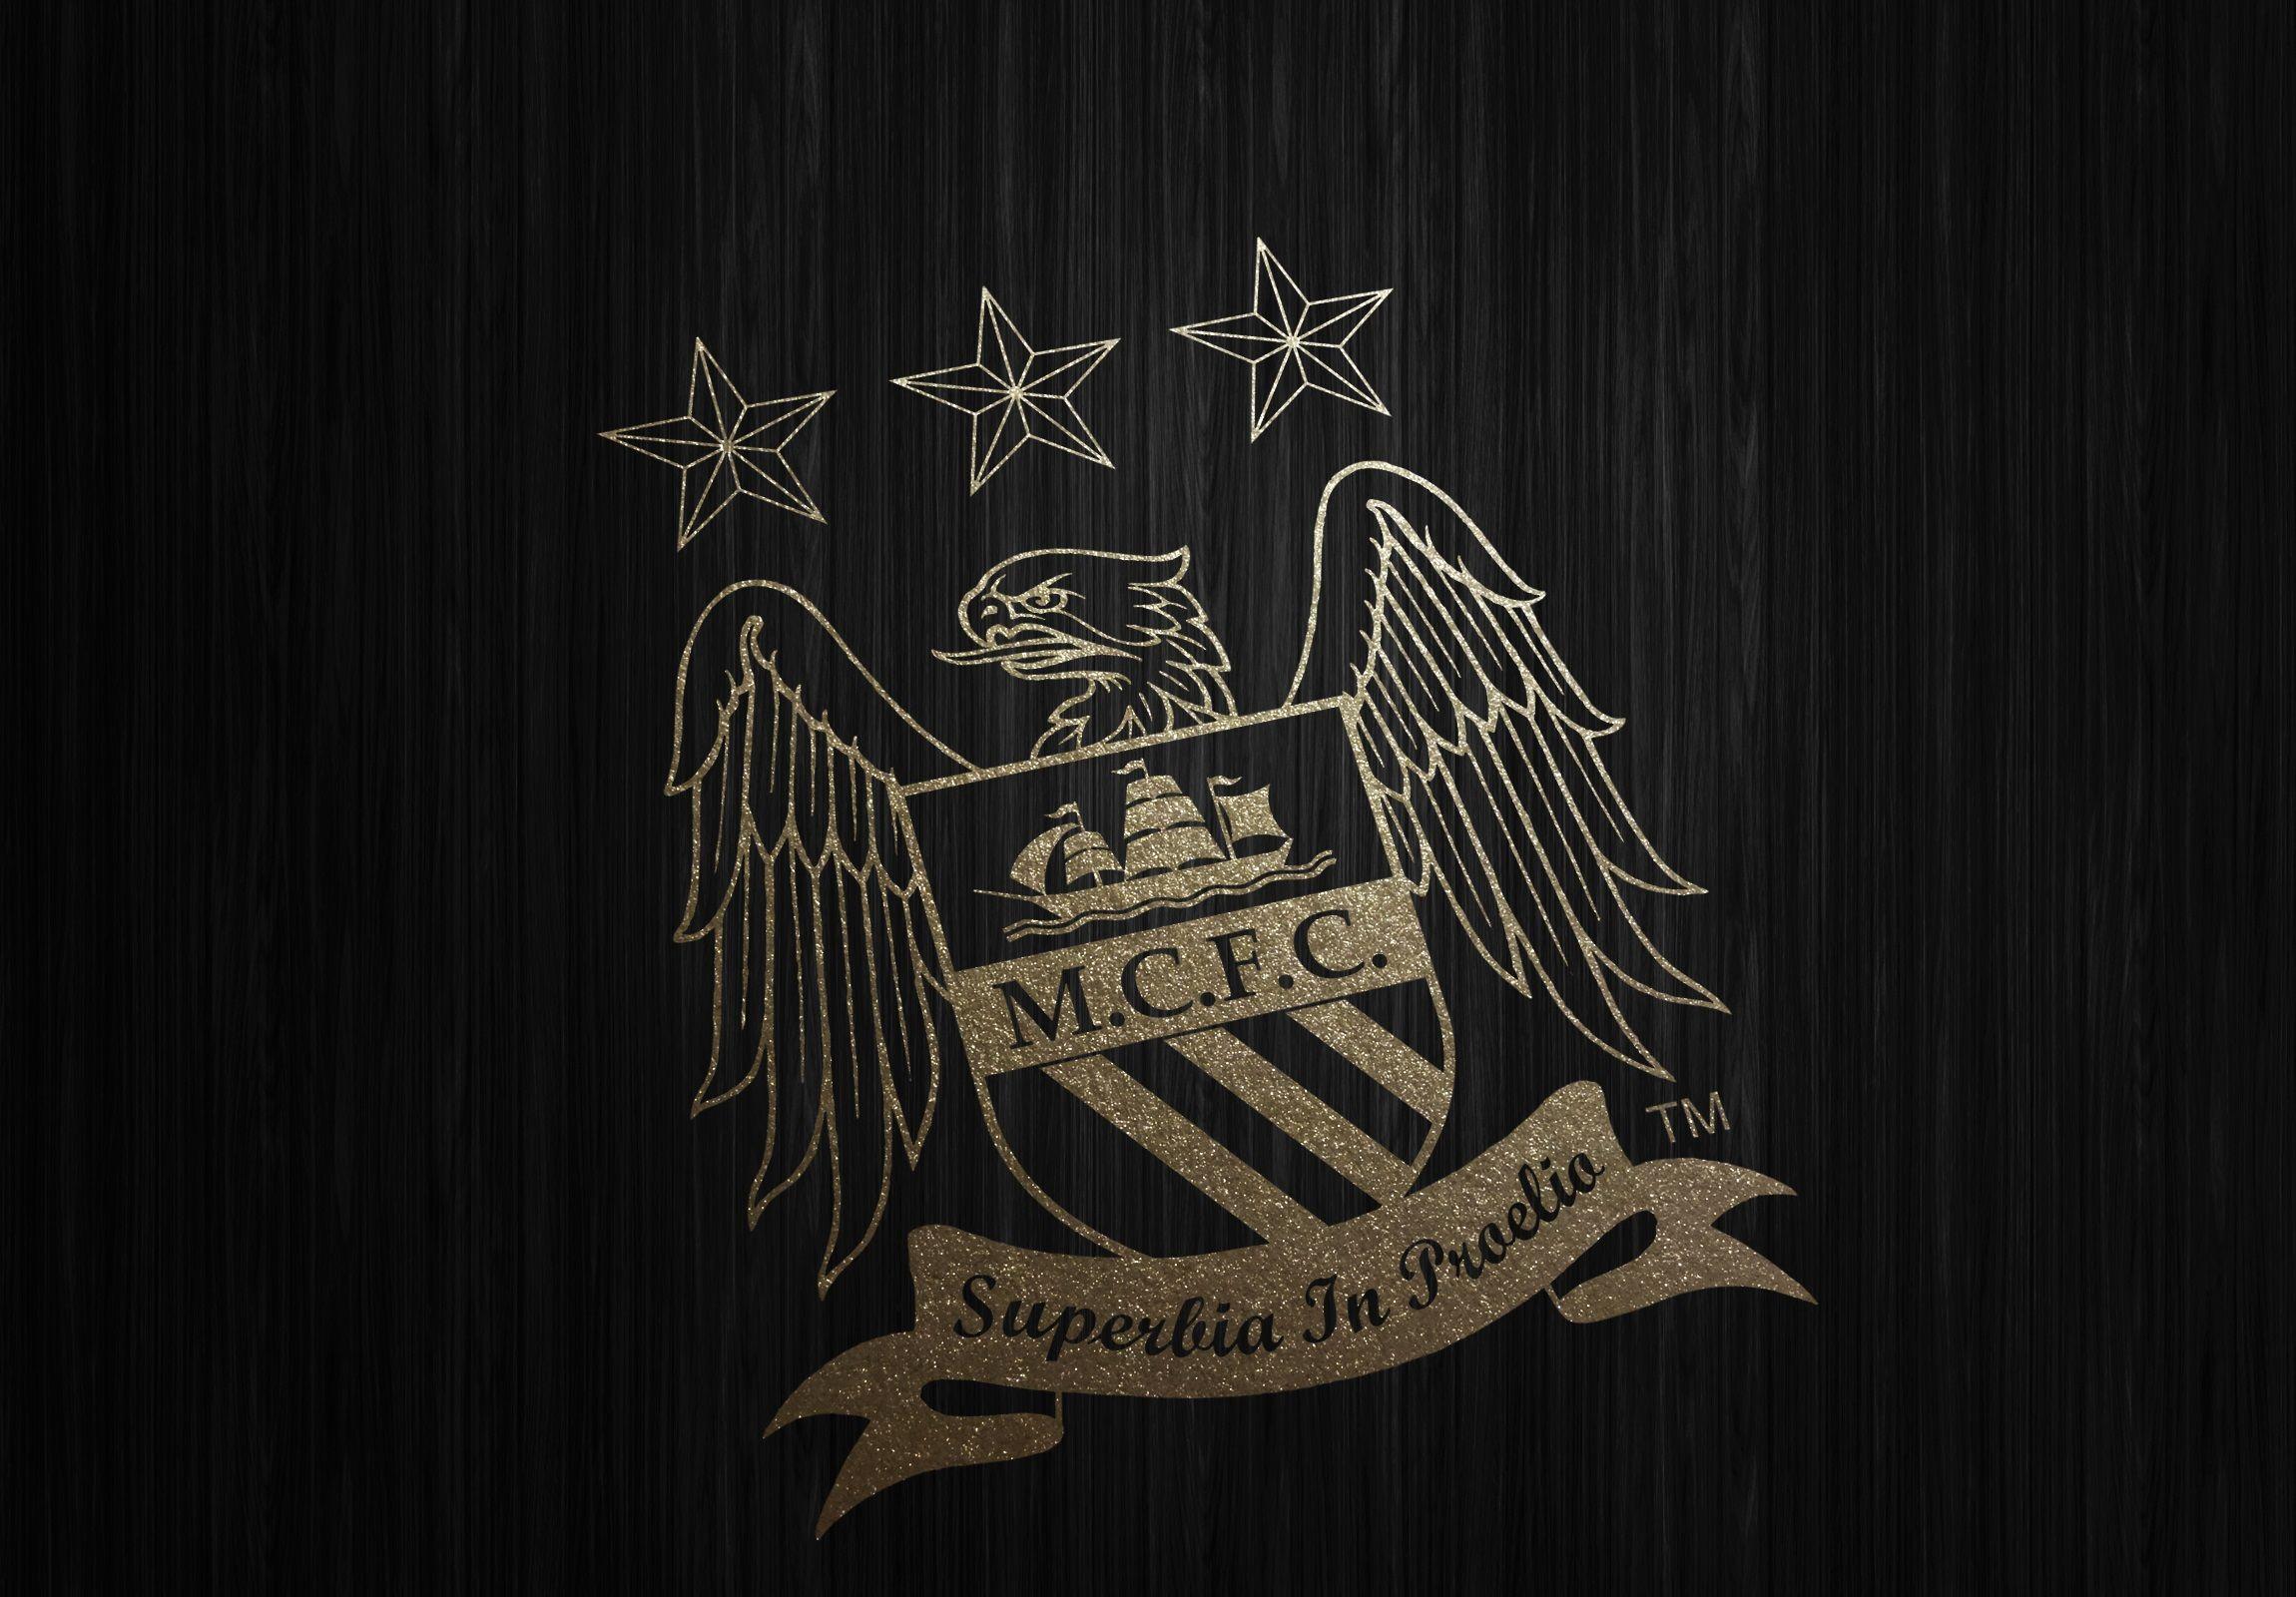 Manchester City Wallpapers Hd Wallpaper Cave